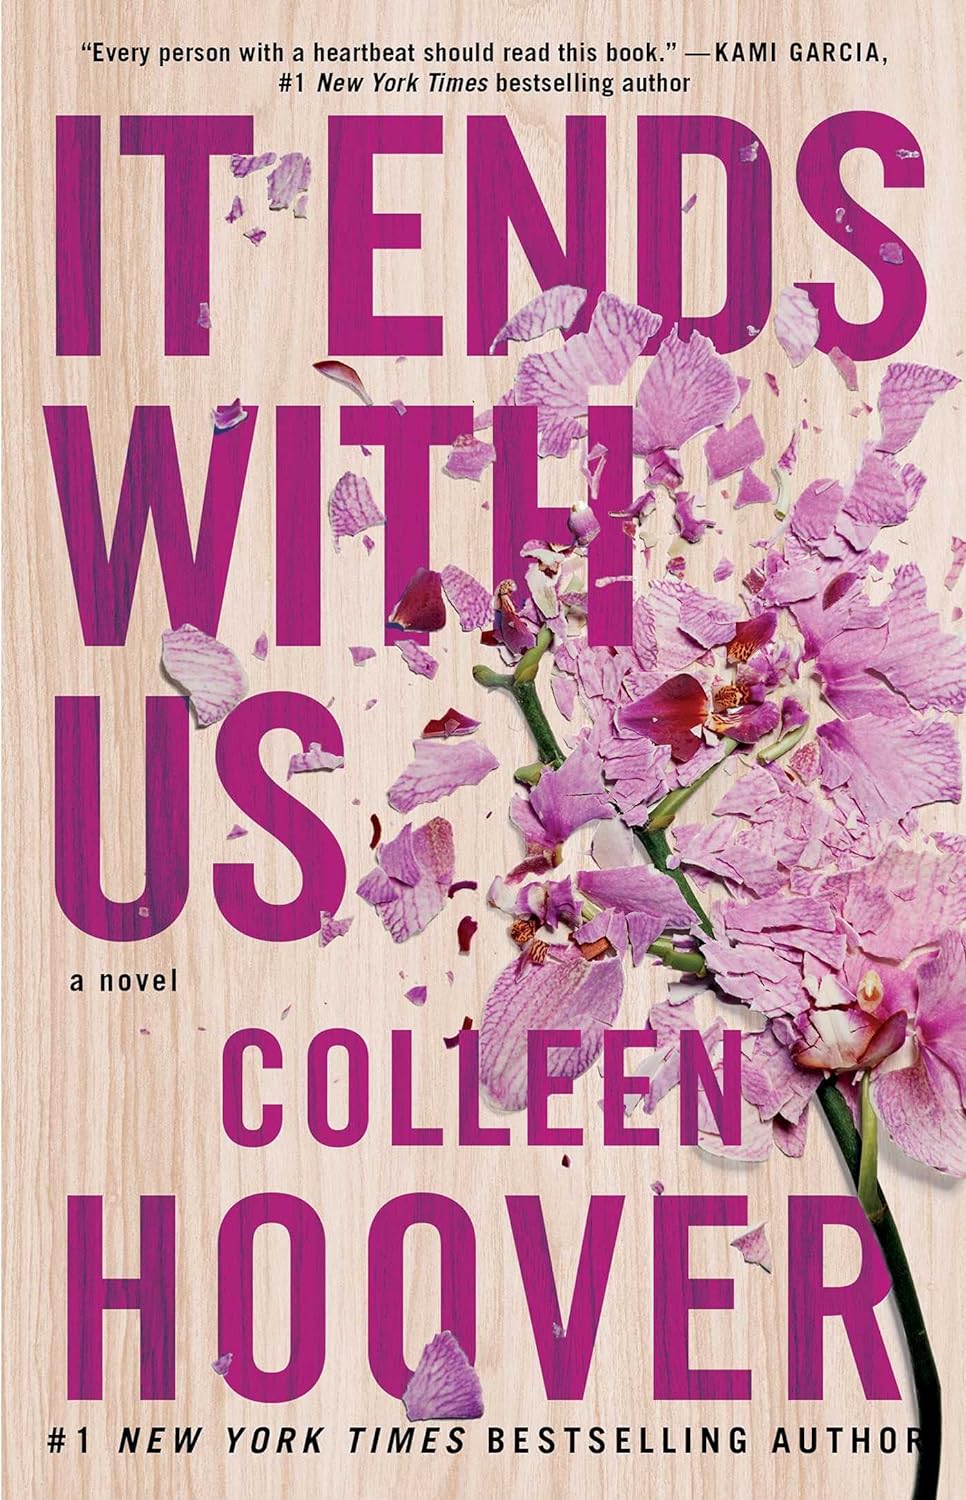 It Ends with Us: A Novel (1)     Paperback – August 2, 2016